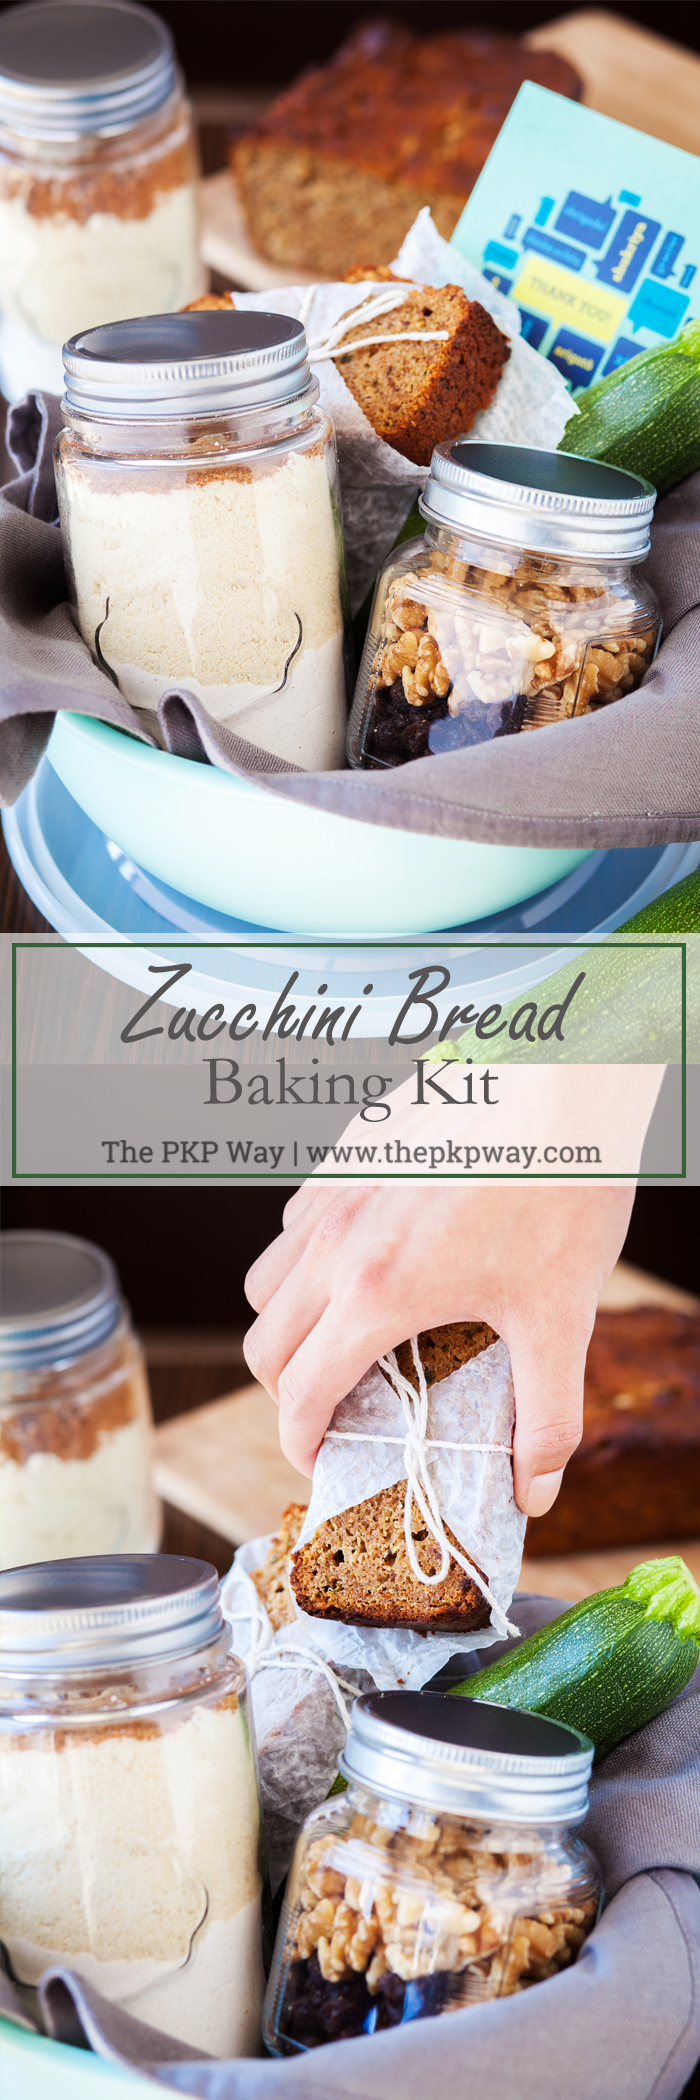 Moist, easy, and delicious Zucchini Bread suitable for both gluten-tolerant and gluten-free diets.